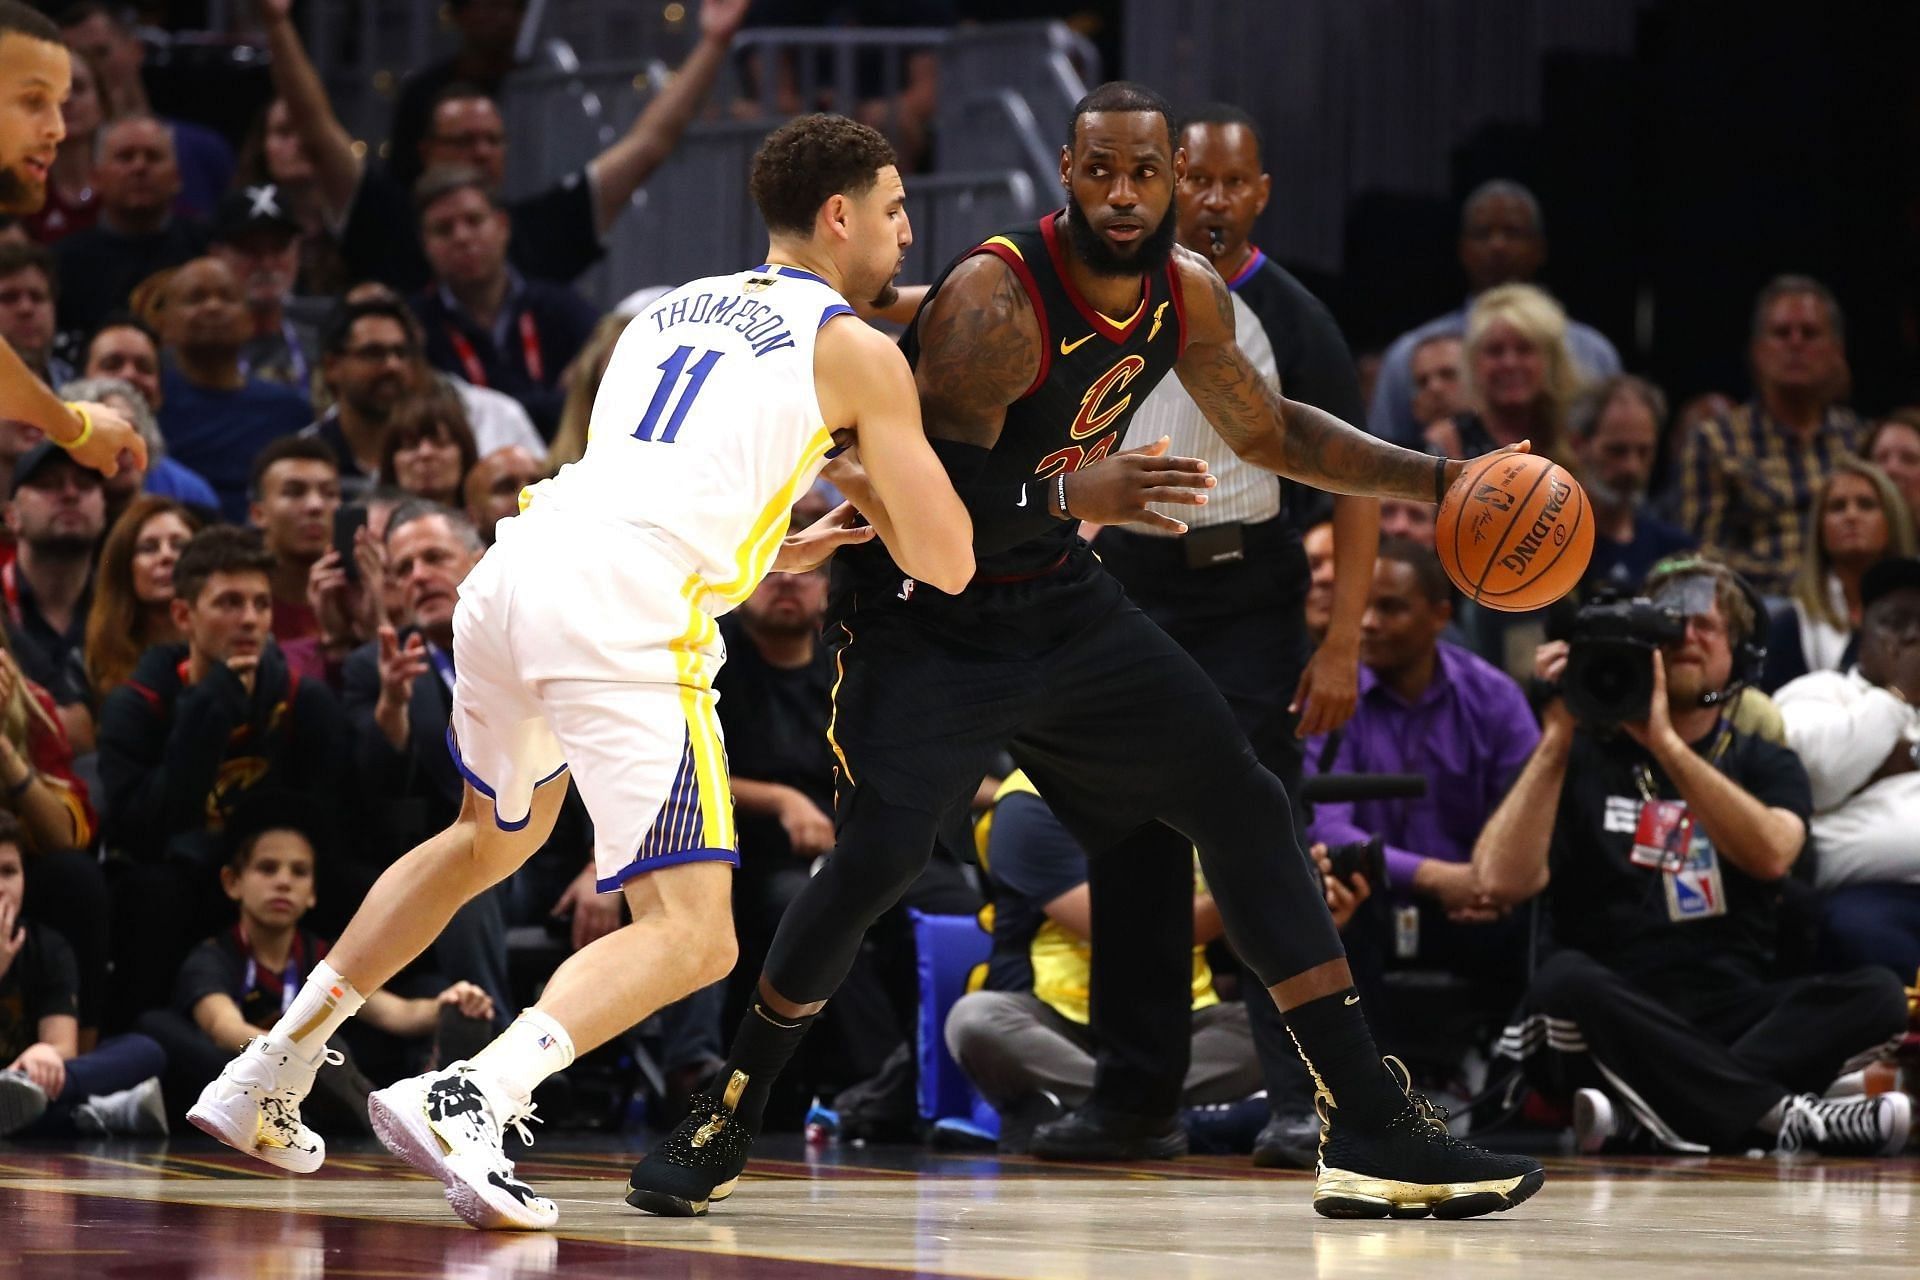 Klay Thompson praises LeBron James to carry Cavs to the finals against the  Warriors: "That was a nasty big three, man…Bron is a beast”